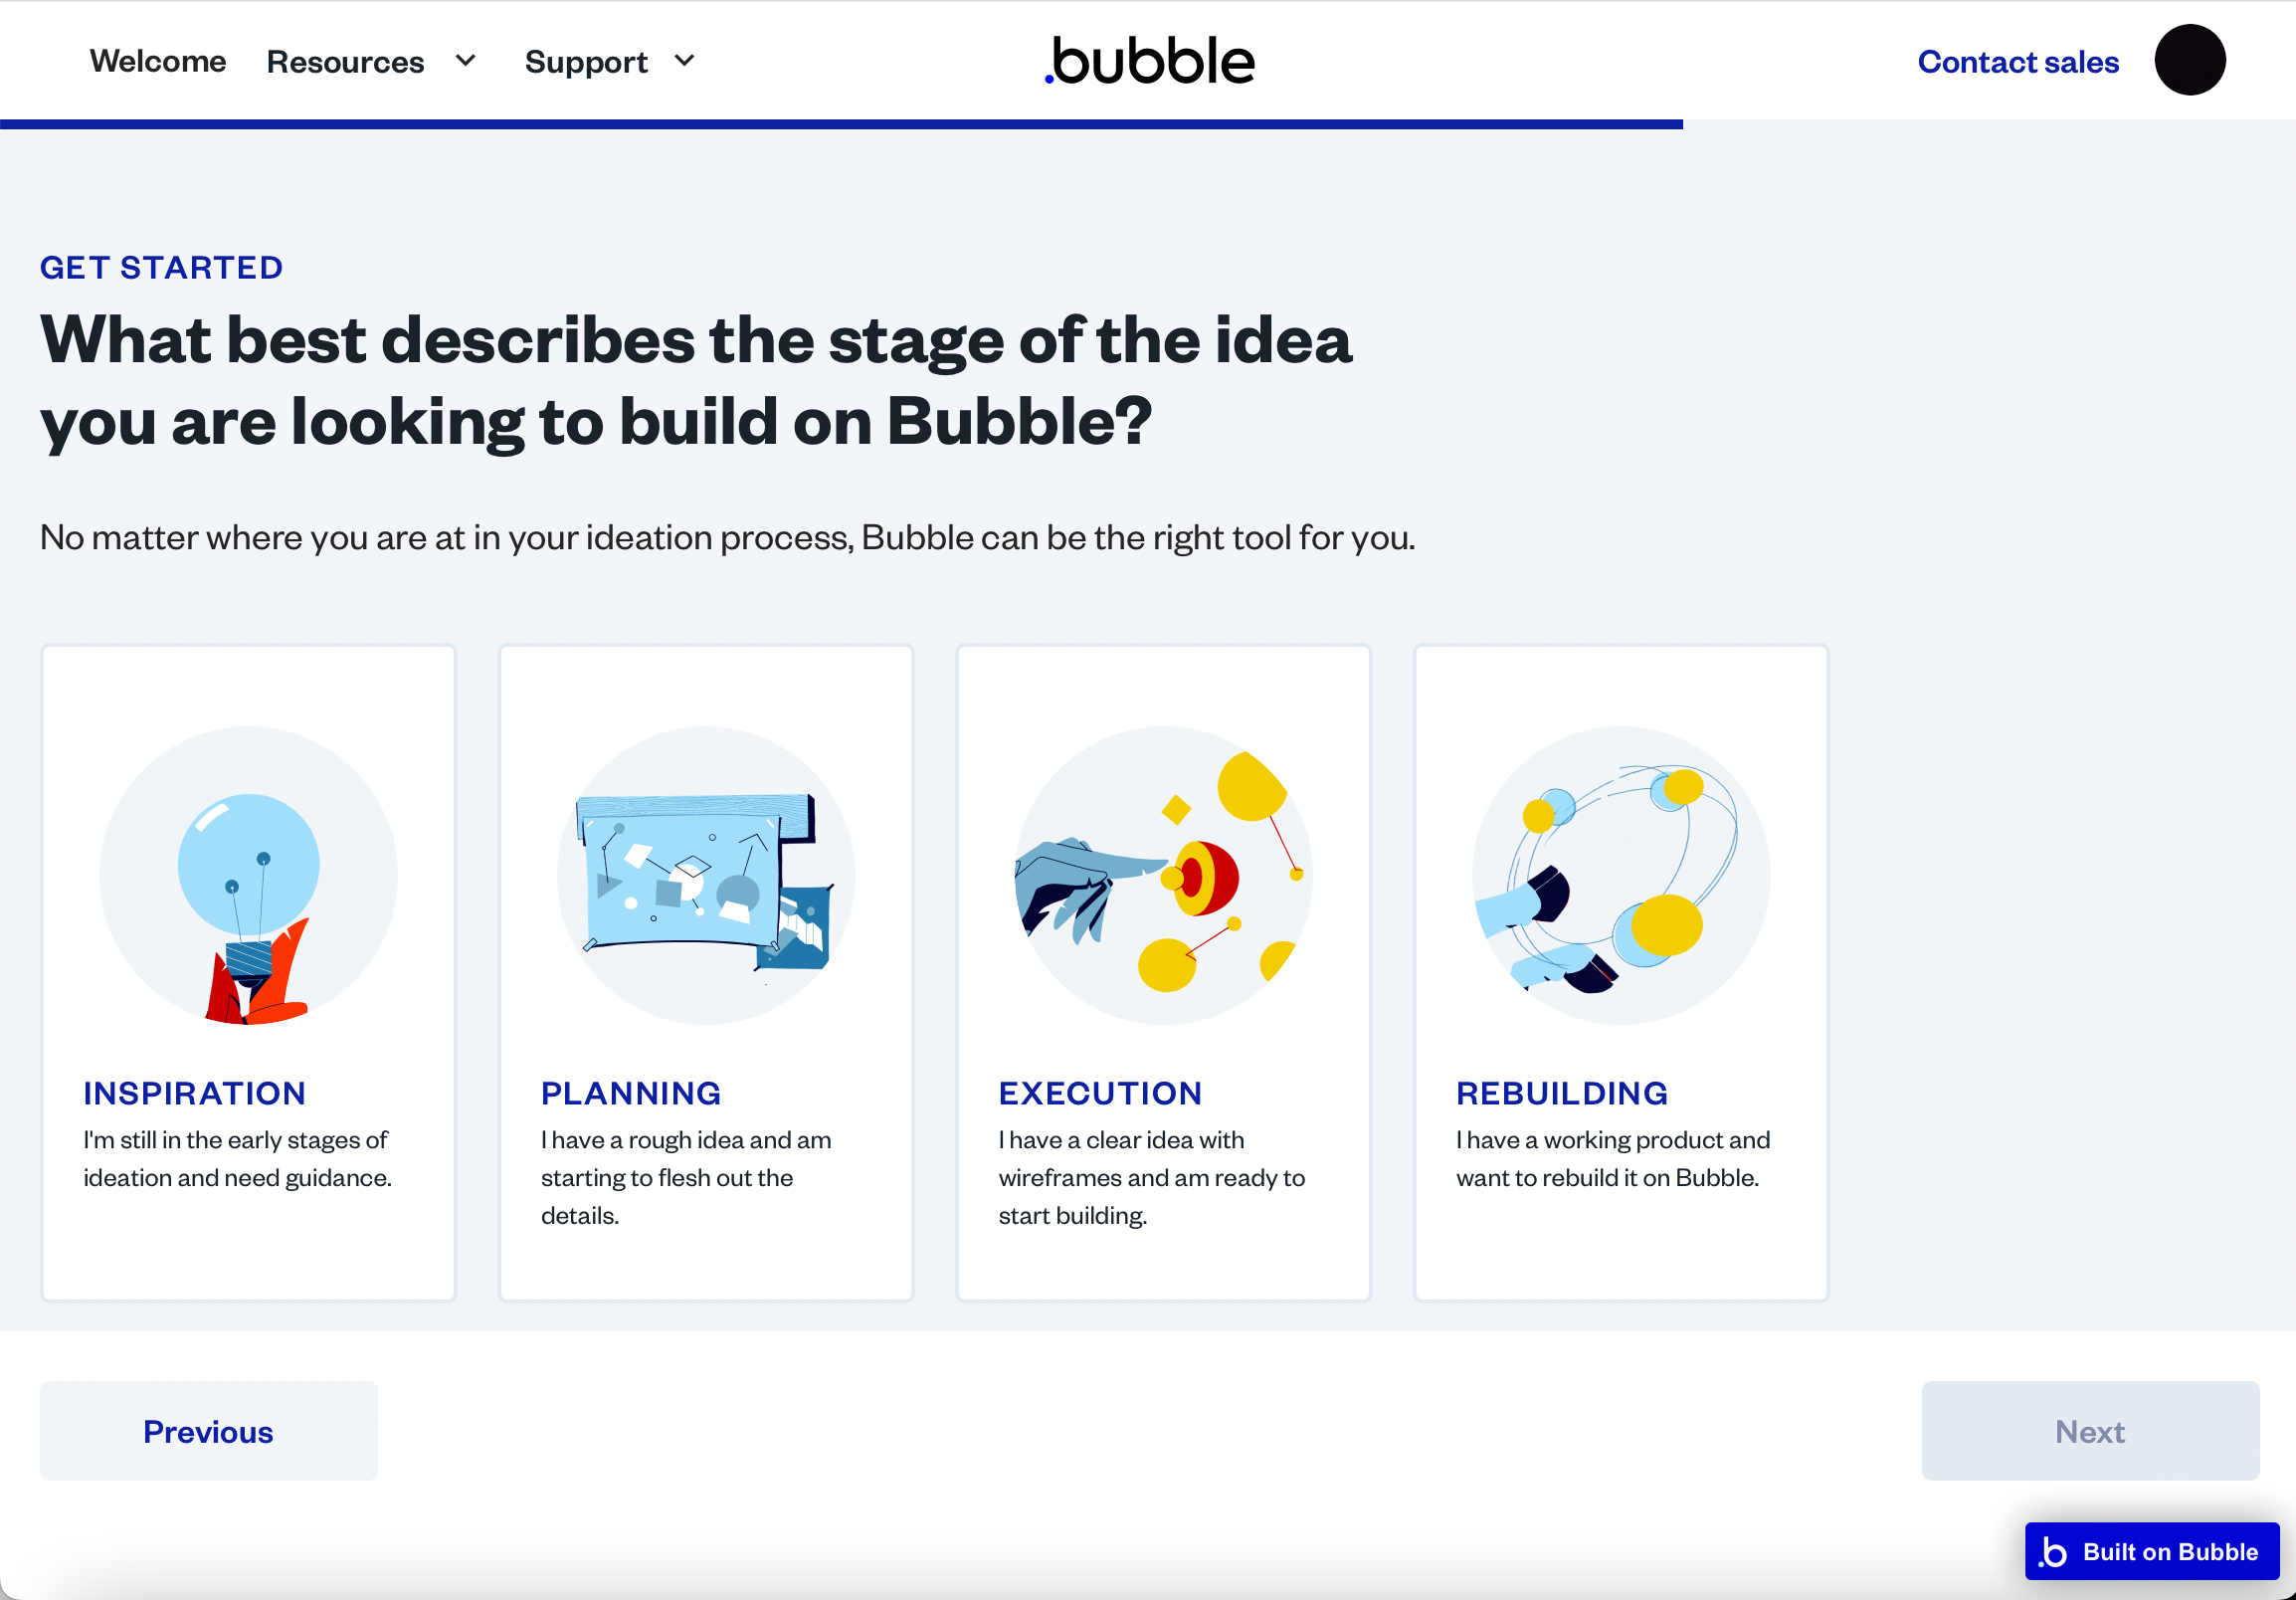 This Is the Bubble.io For Game Development!